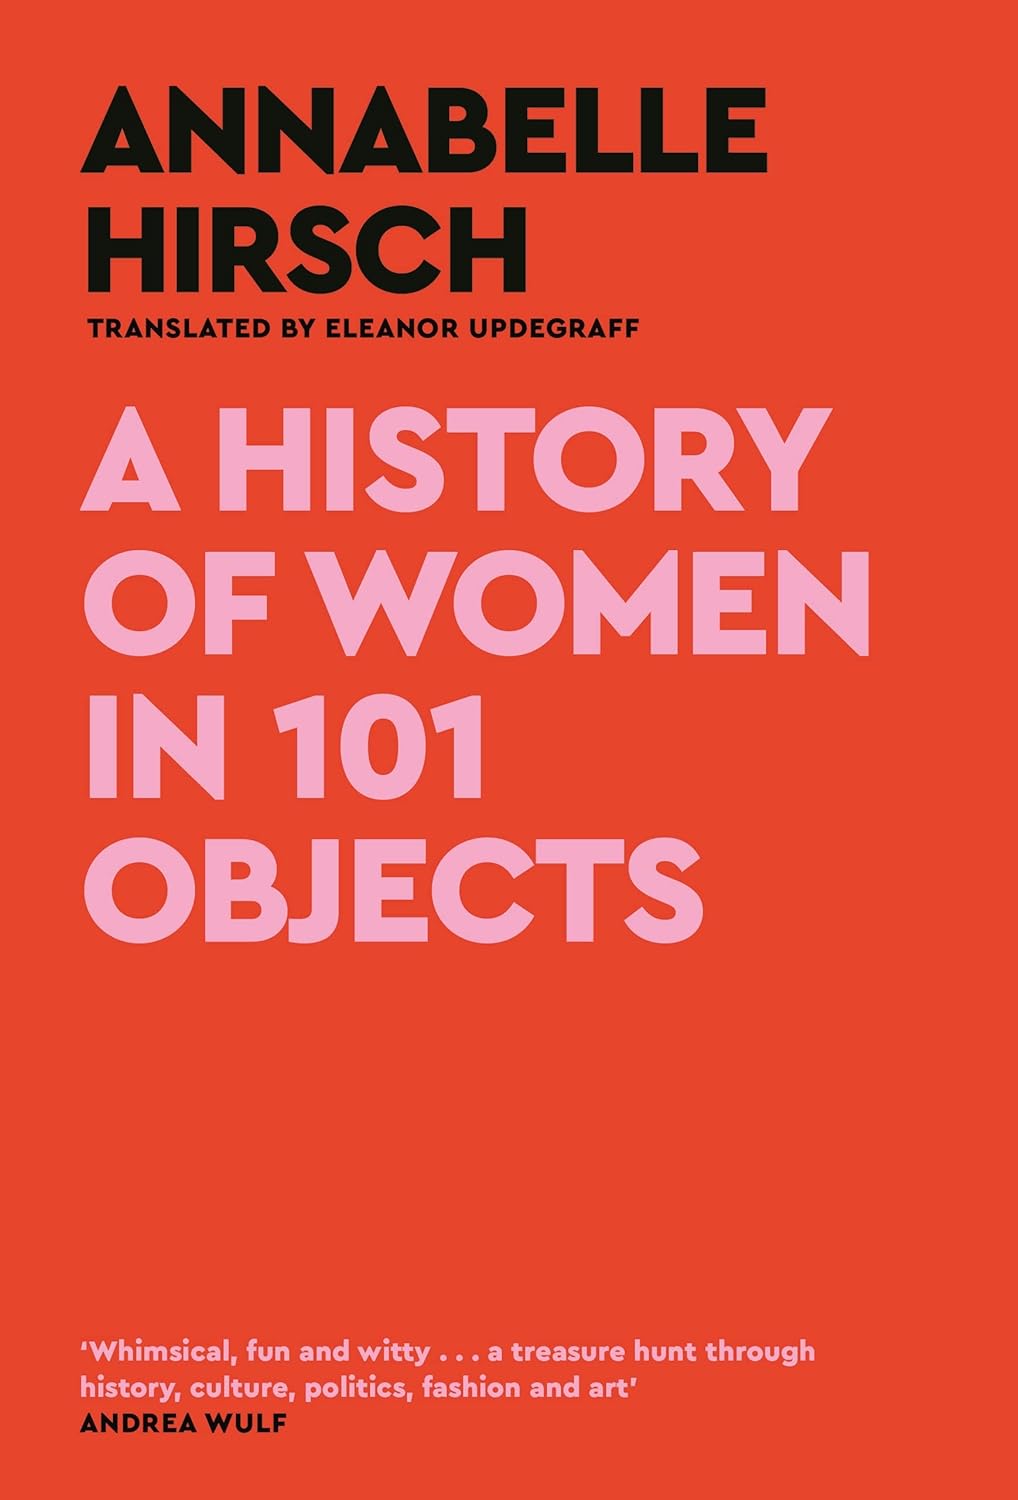 History of Women in 101 Objects (2023, Canongate Books)